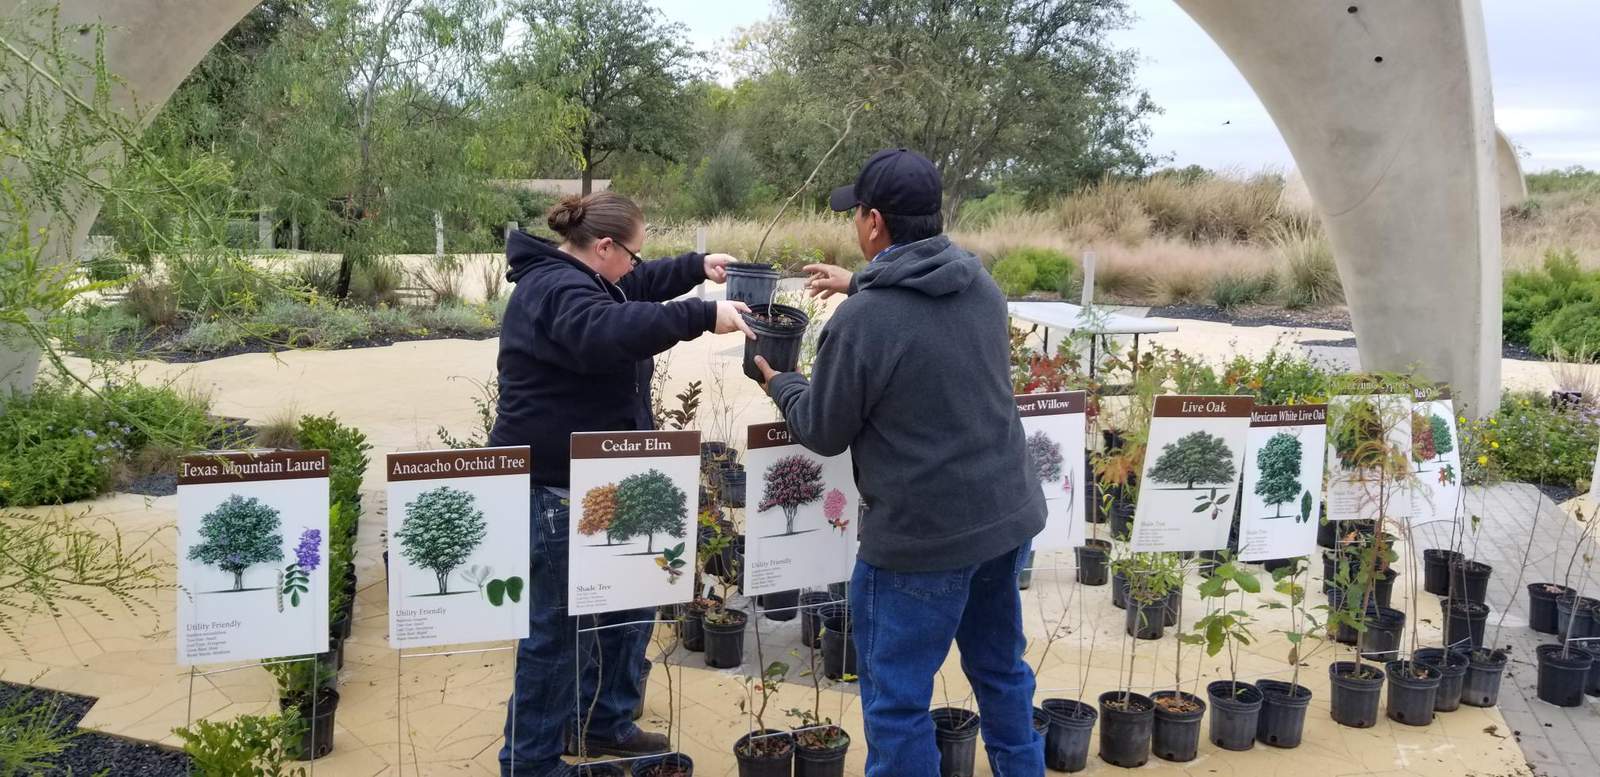 500 free trees to be given away at Confluence Park event